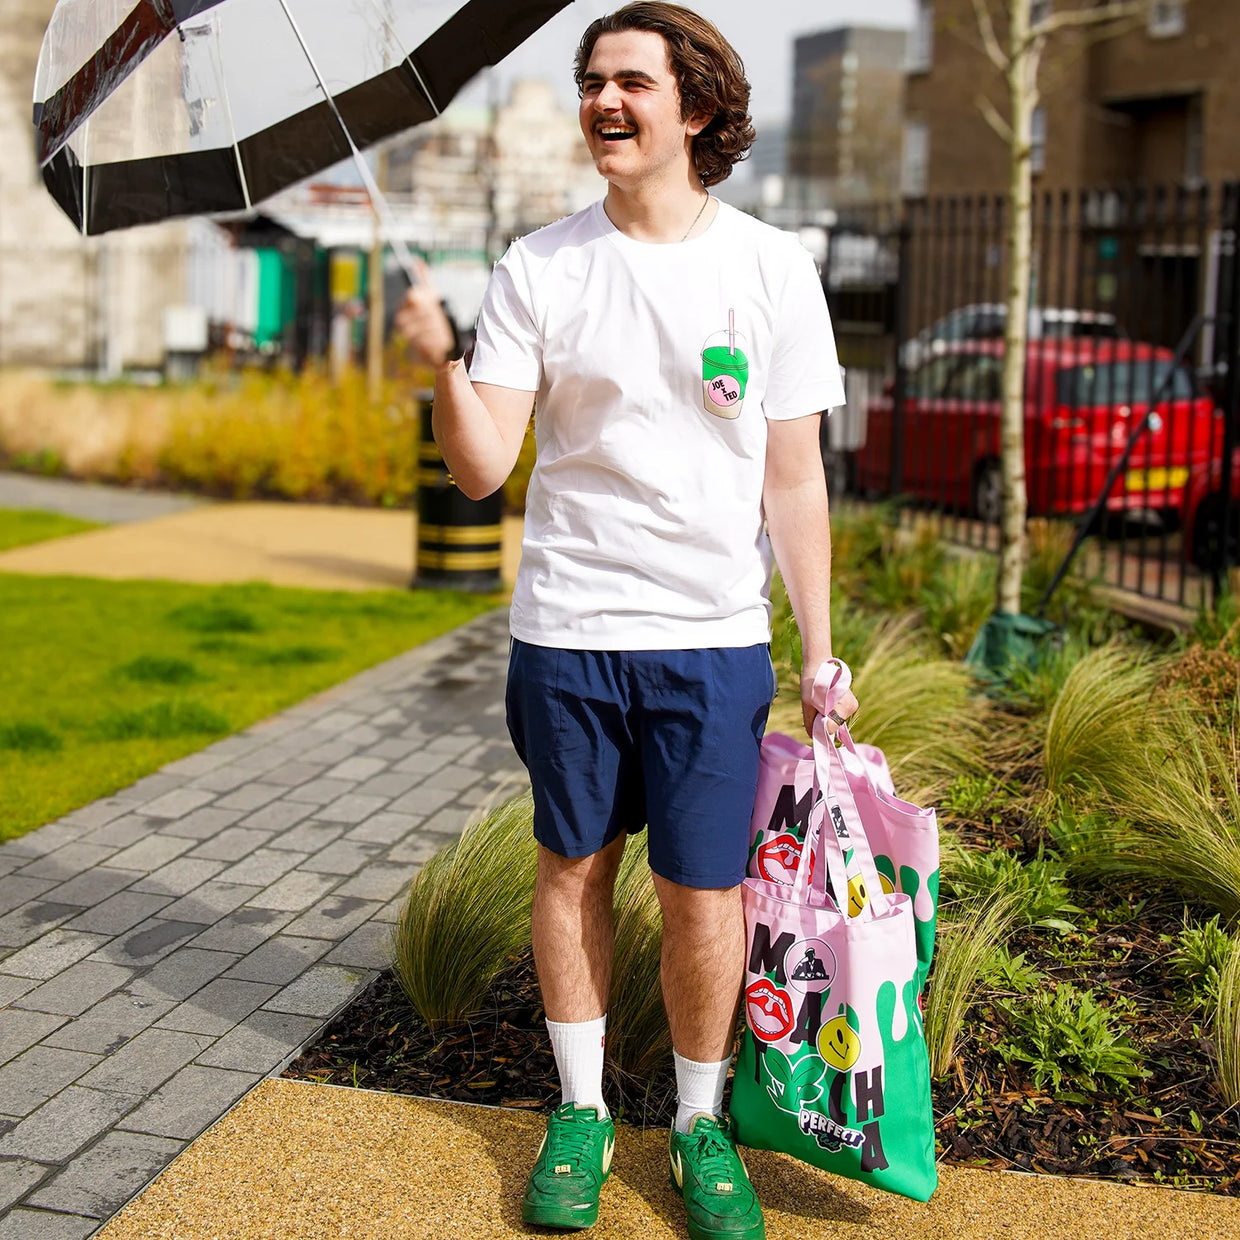 Max walking outside with our durable tote bags